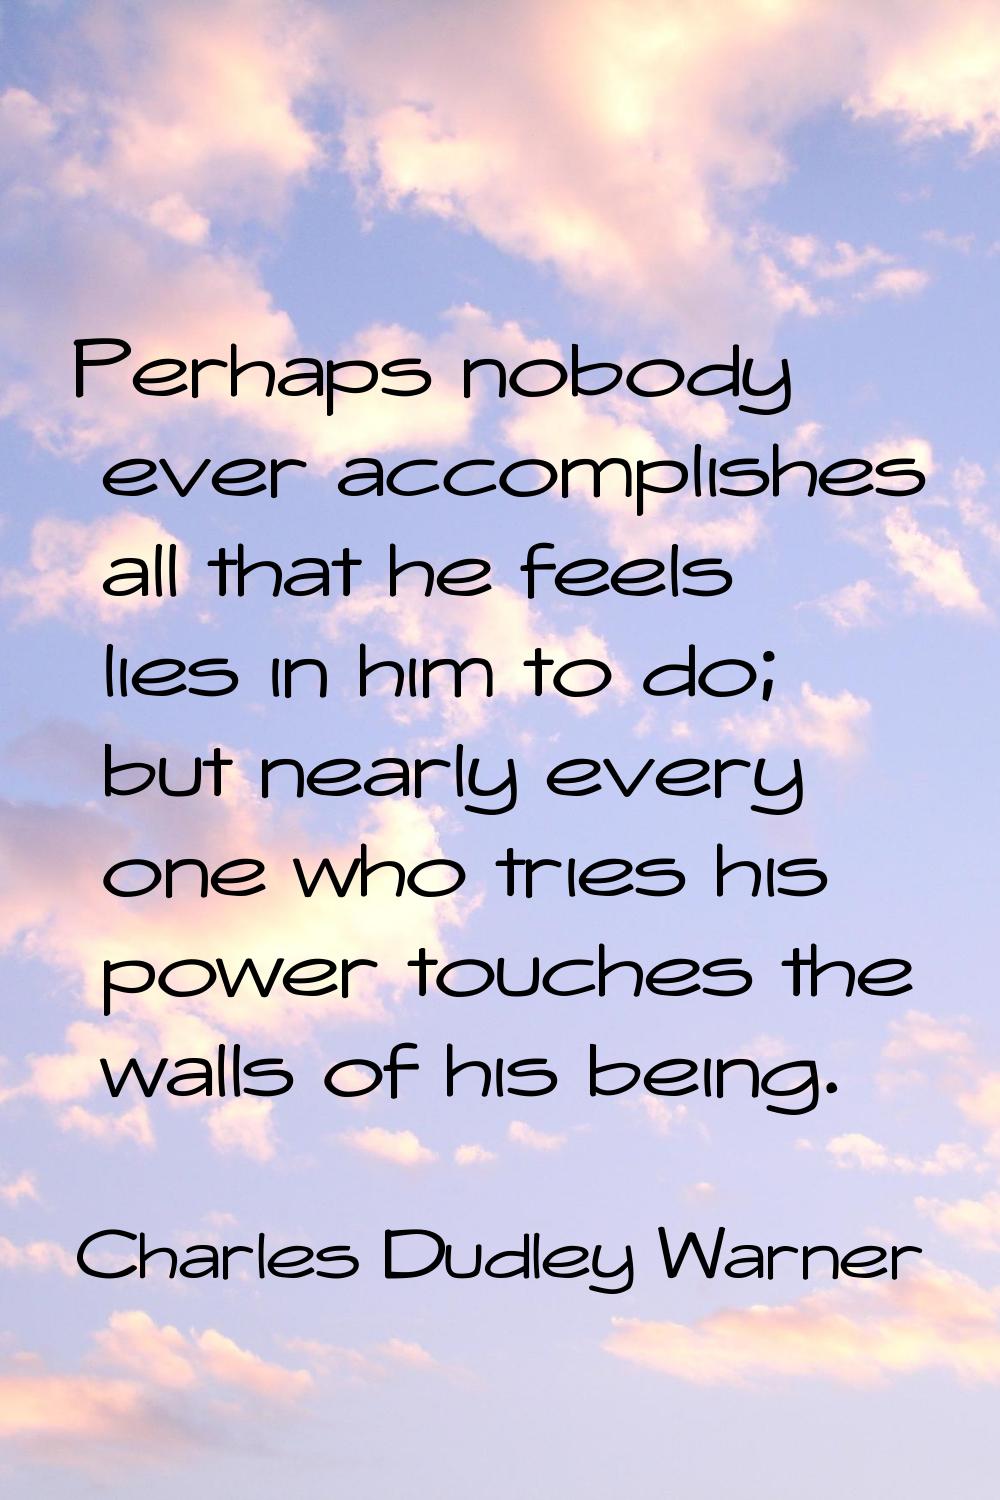 Perhaps nobody ever accomplishes all that he feels lies in him to do; but nearly every one who trie